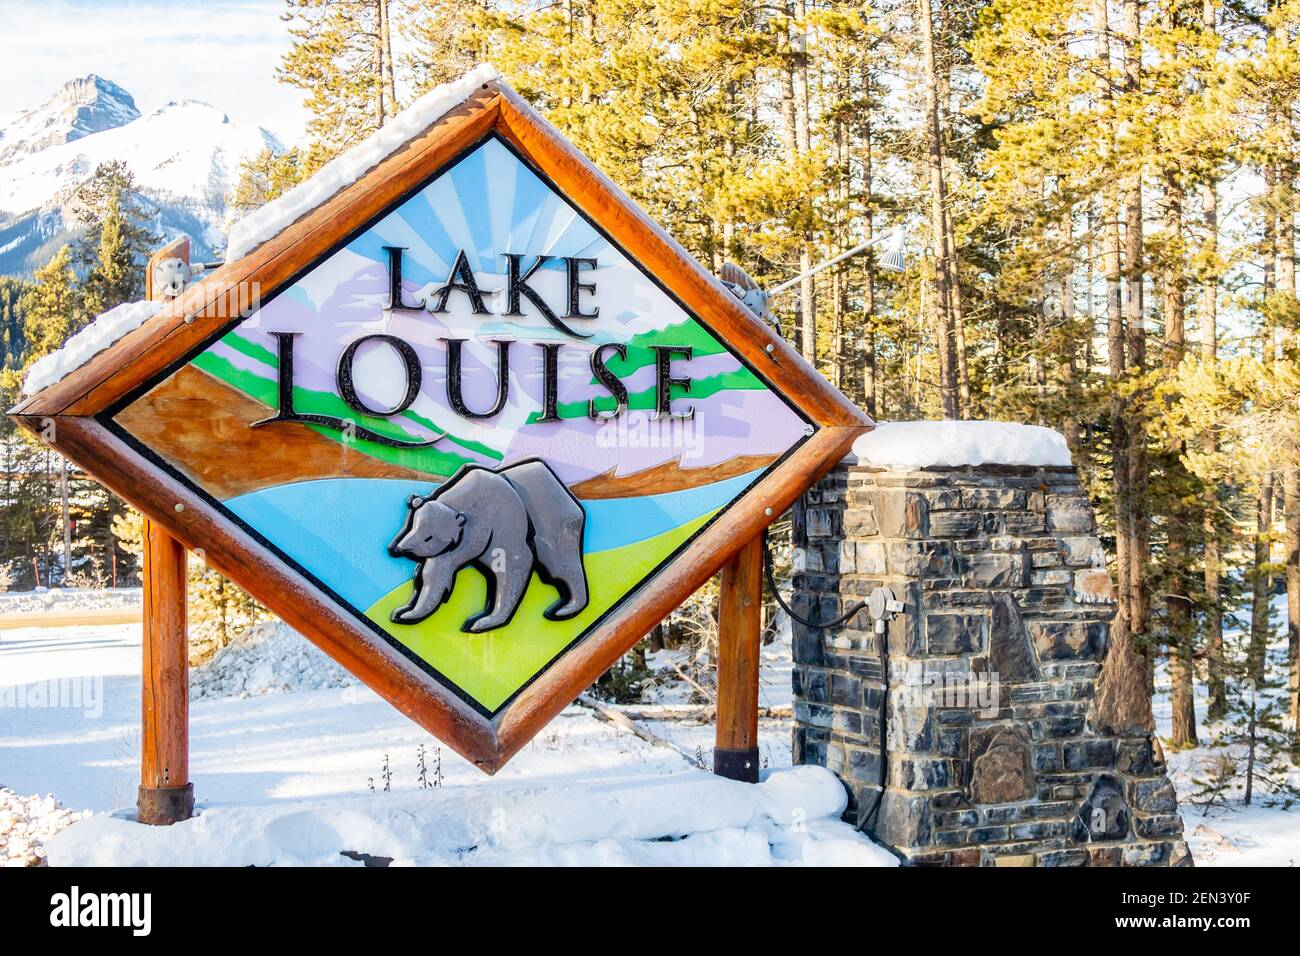 Entrance sign to Lake Louise, Canada Stock Photo